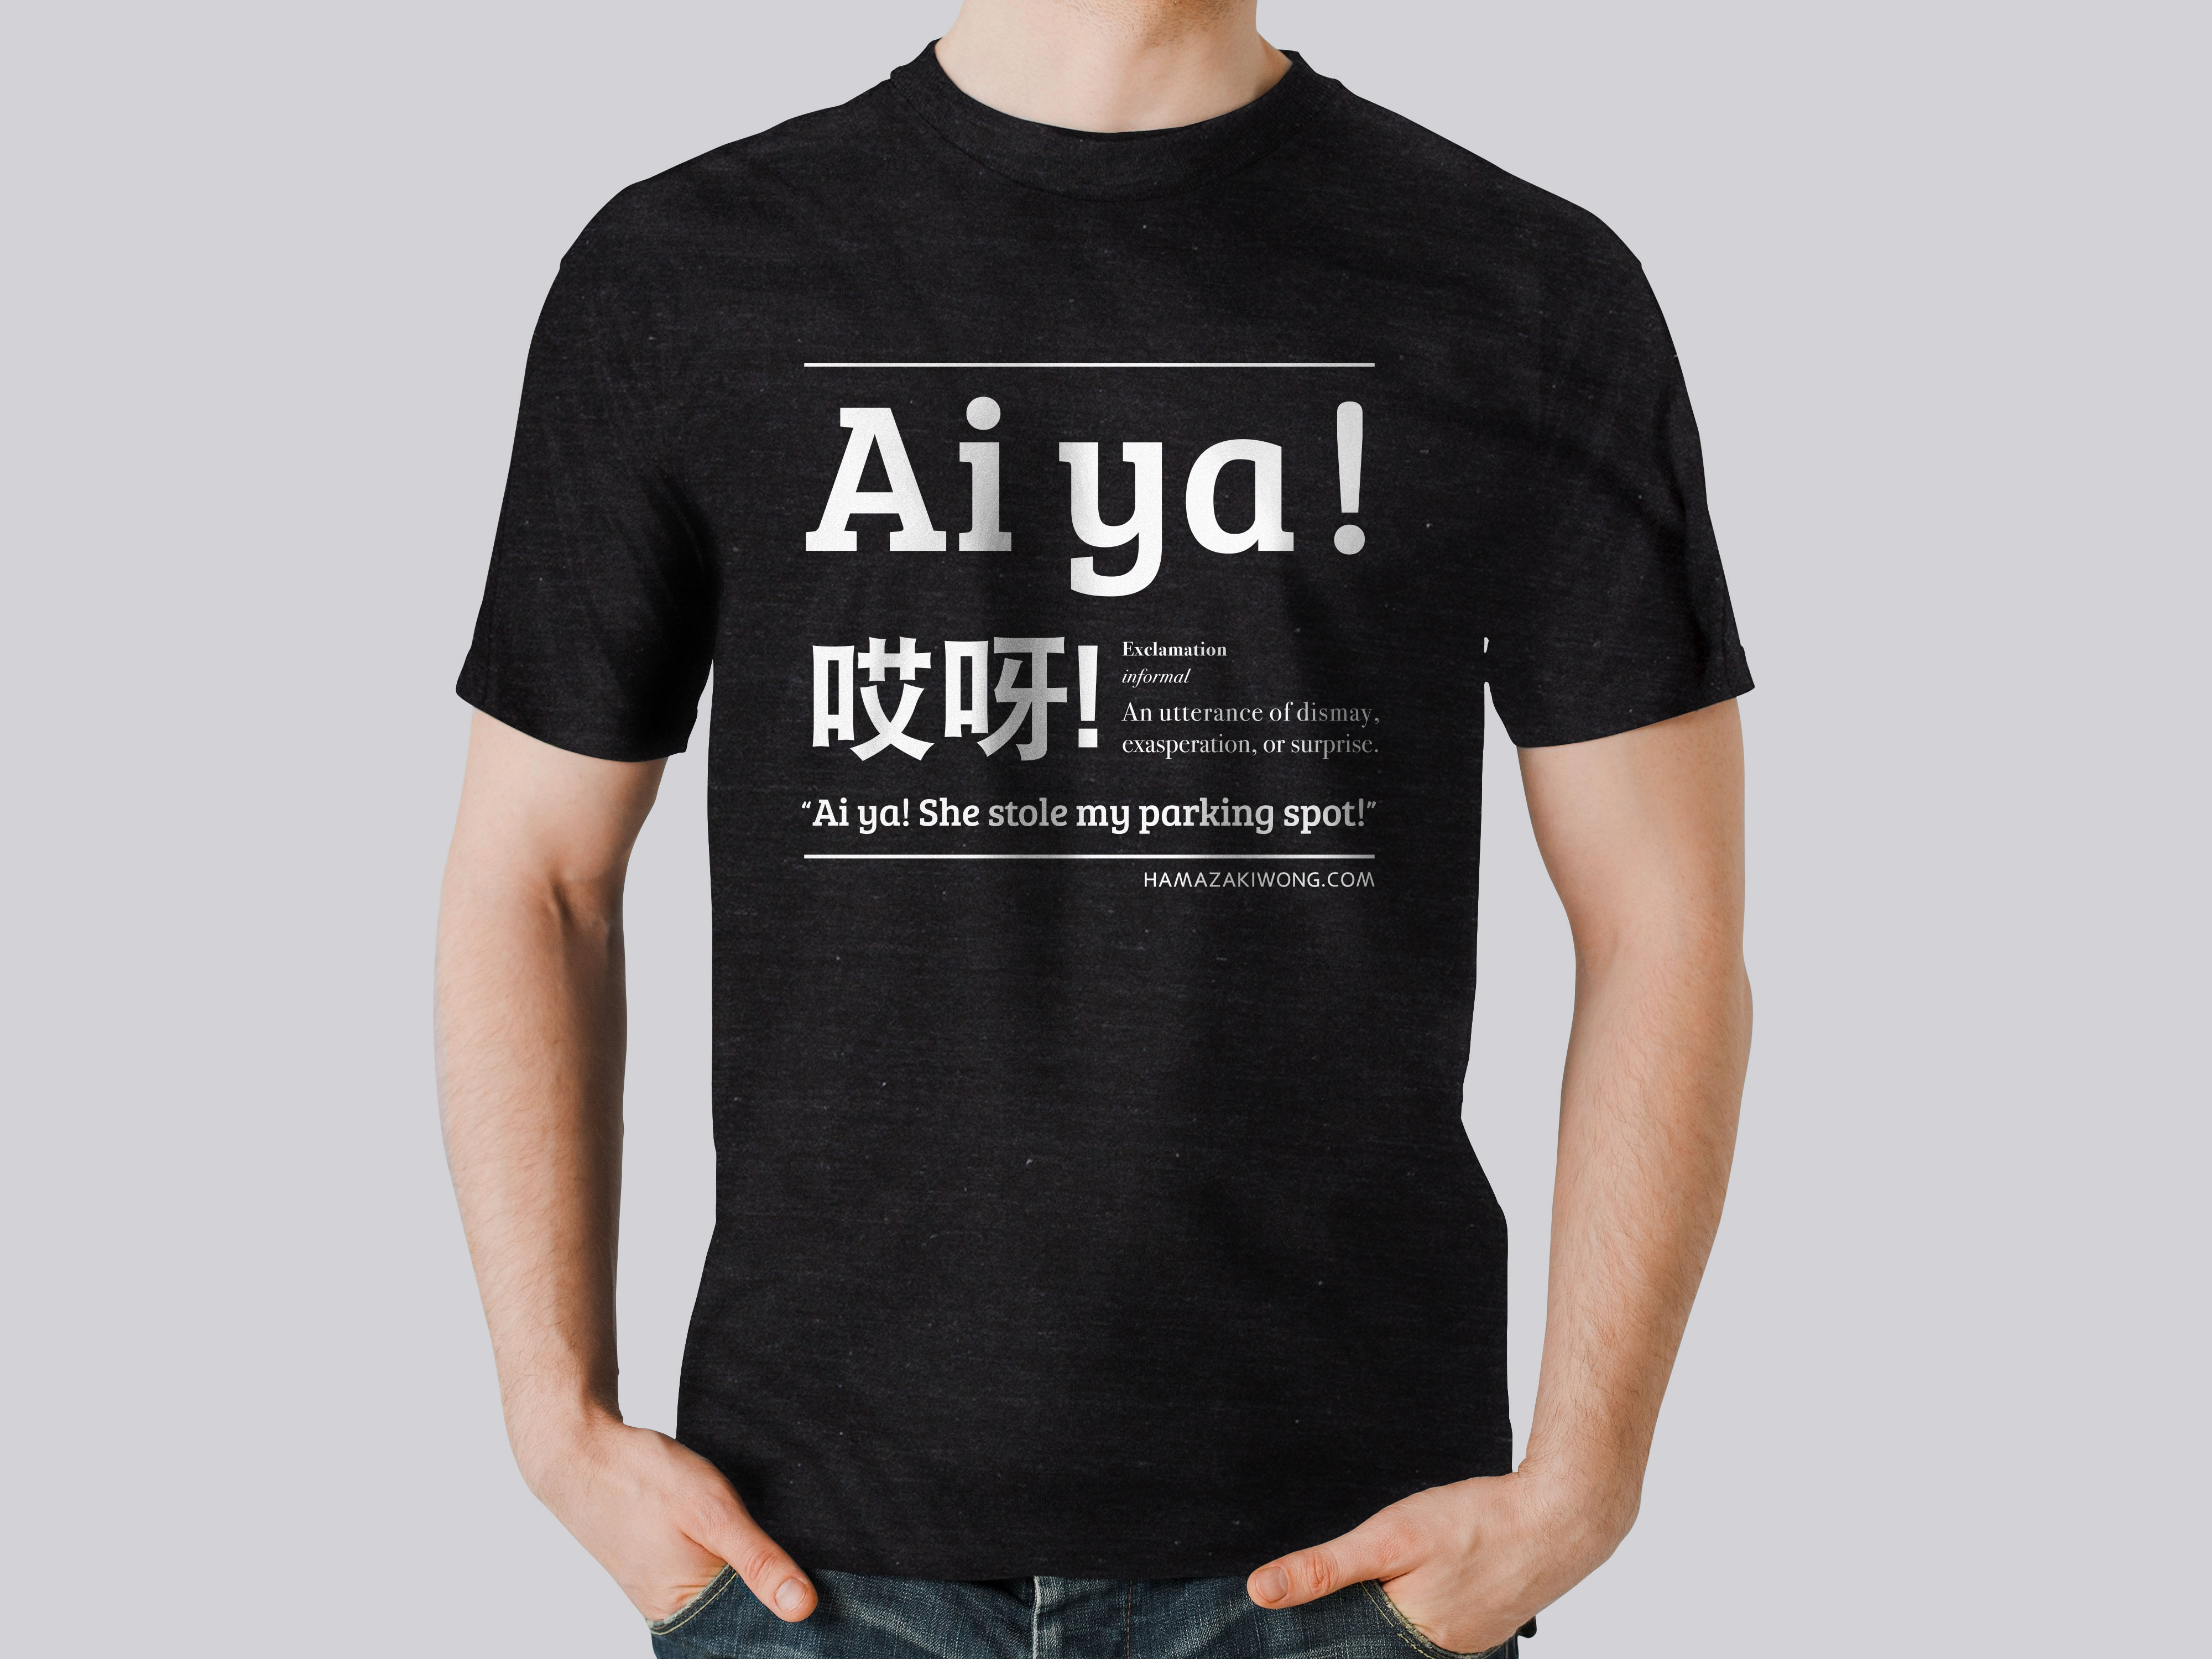 Bicultural T-Shirts (the only ones in town!)